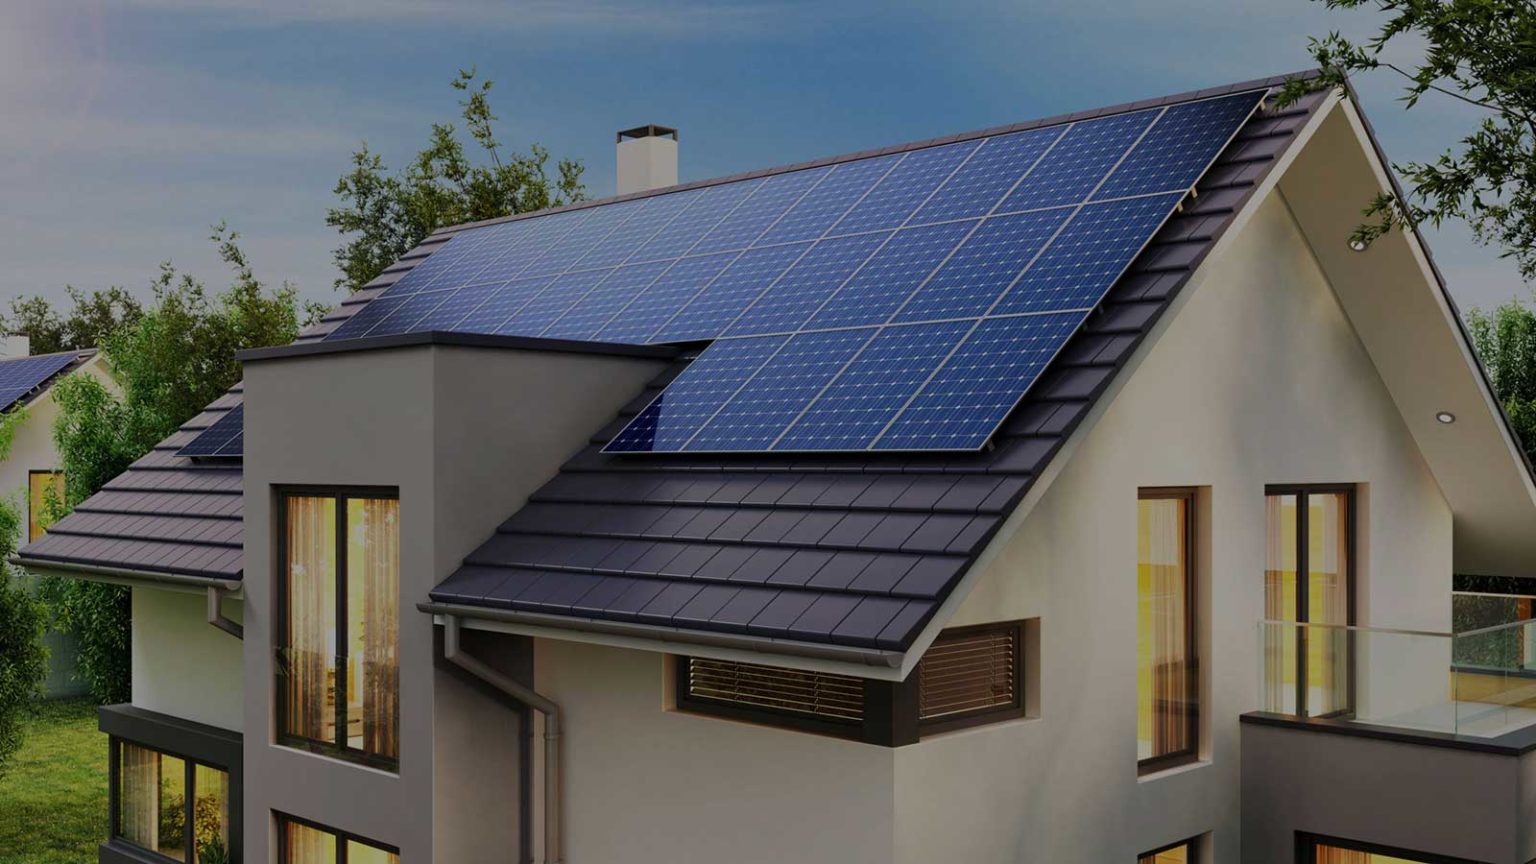 How Much Does A Solar Panel Cost?